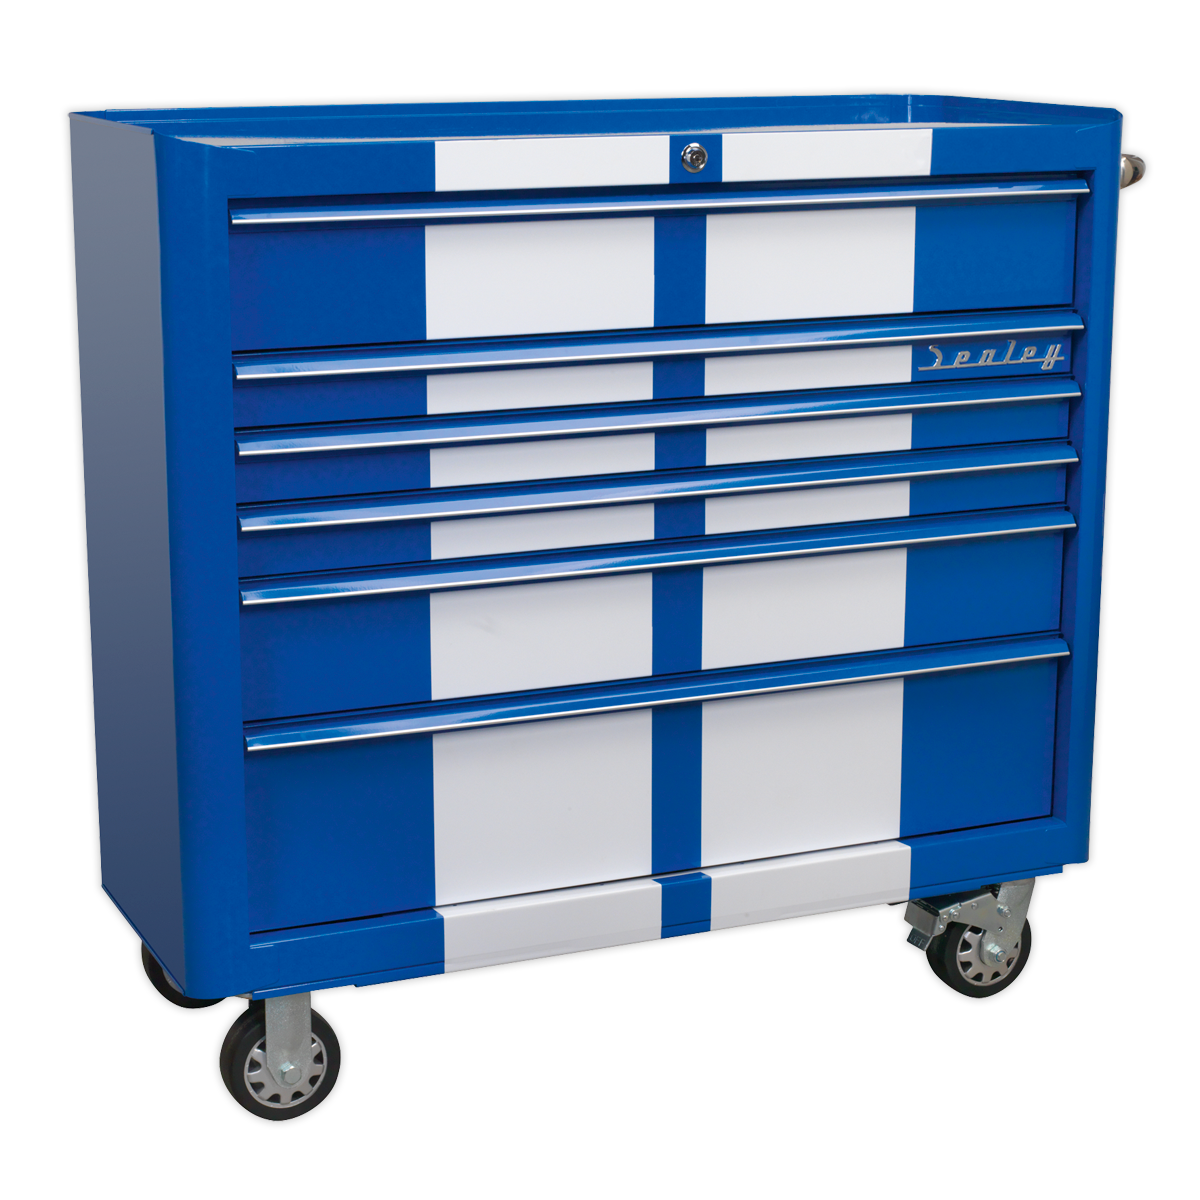 Sealey Rollcab 6 Drawer Wide Retro Style - Blue with White Stripes